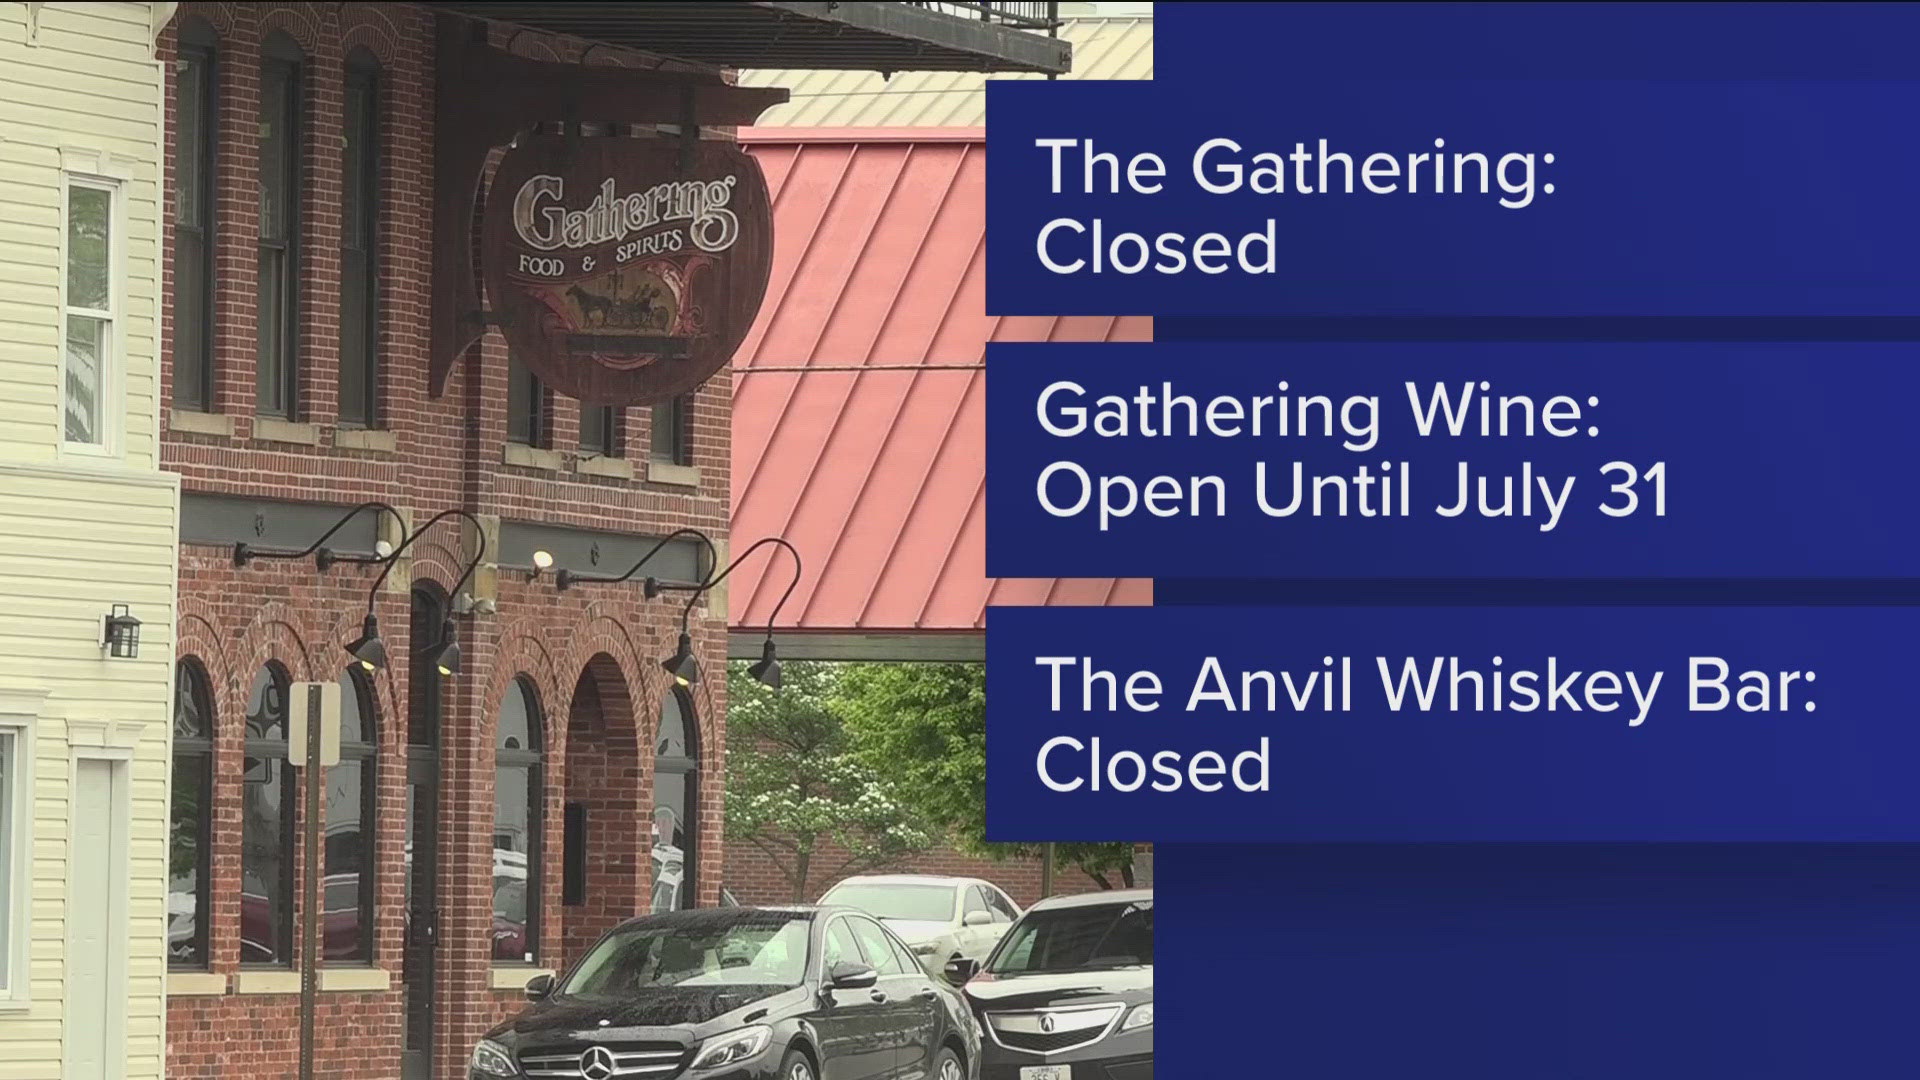 The Gathering and The Anvil in downtown Findlay have closed their doors, the restaurant said on social media. The Gathering Wine will stay open until July 31.